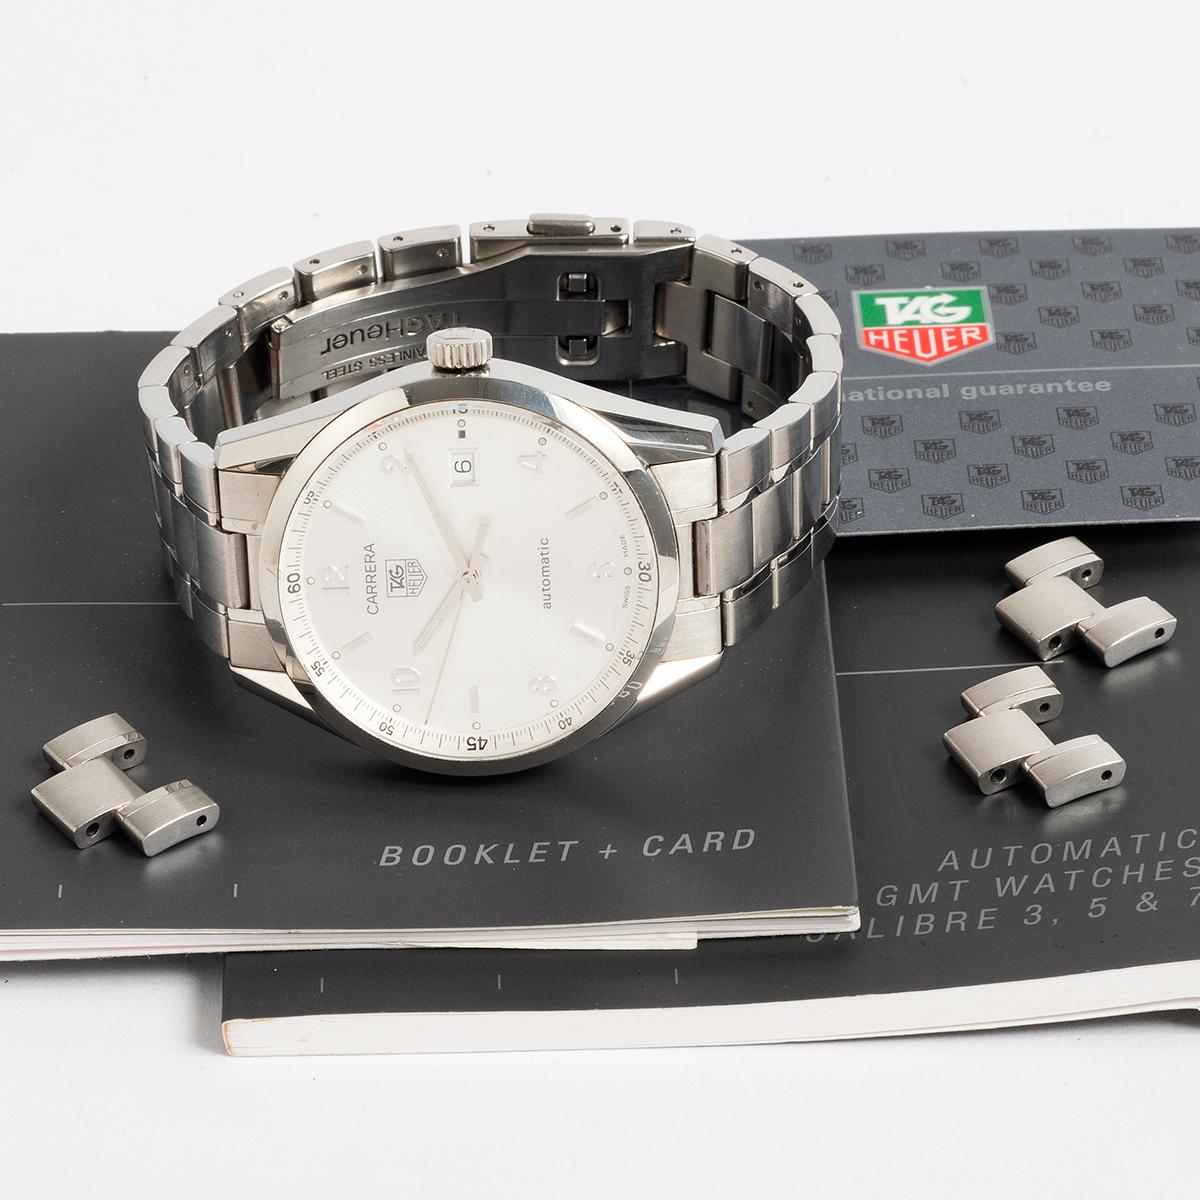 Our Tag Heuer Carrera Date reference WV211A features a stainless steel 38mm case with silver sun ray dial and stainless steel bracelet with folding clasp and exhibition case back, which shows the cal. 5 automatic movement. Presented in excellent